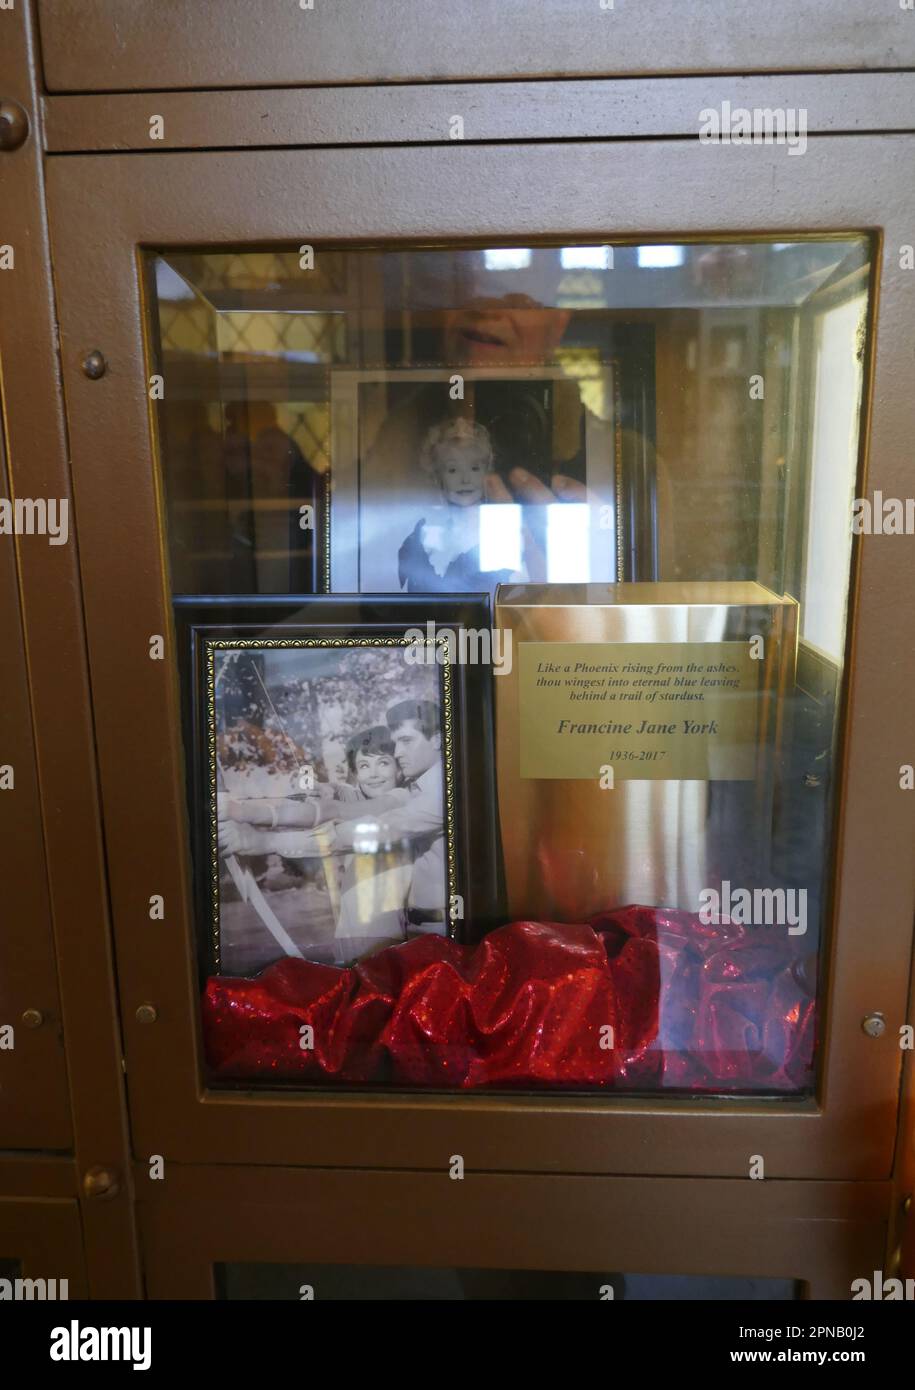 Los Angeles, California, USA 16th April 2023 Actress Francine York Grave in Chapel Columbarium at Hollywood Forever Cemetery on April 16, 2023 in Los Angeles, California, USA. Photo by Barry King/Alamy Stock Photo Stock Photo